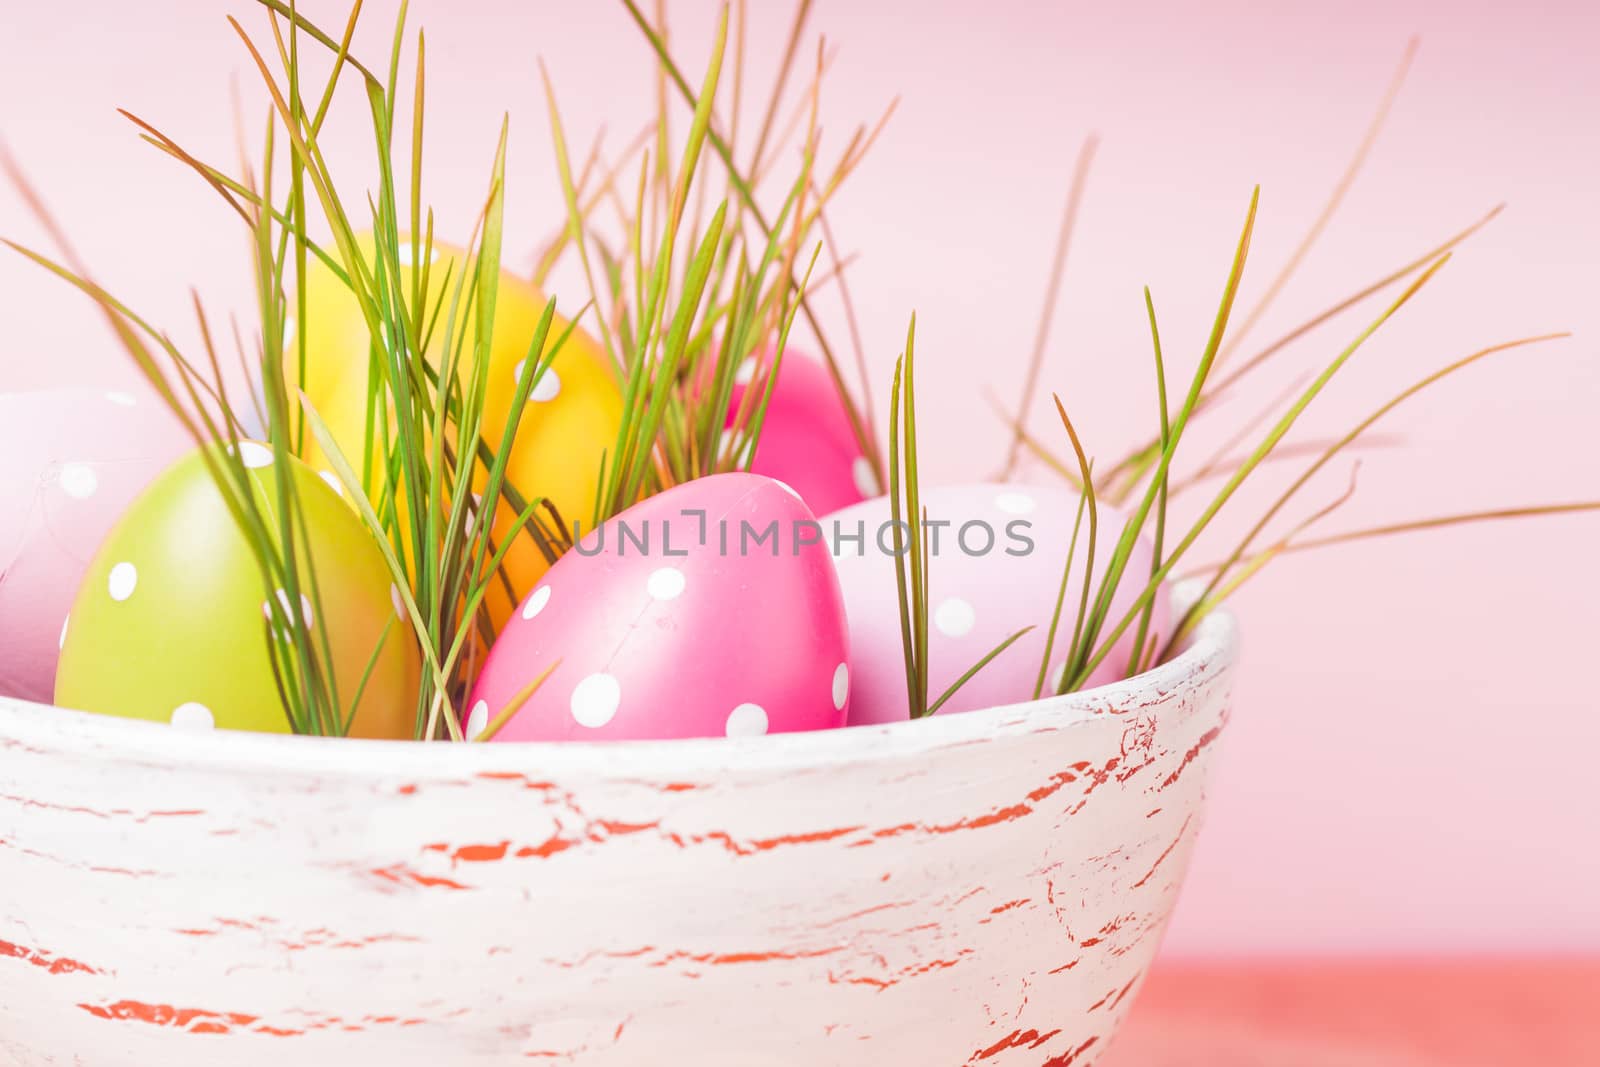 Decorative eggs in pot with grass over pink background. Easter decor.